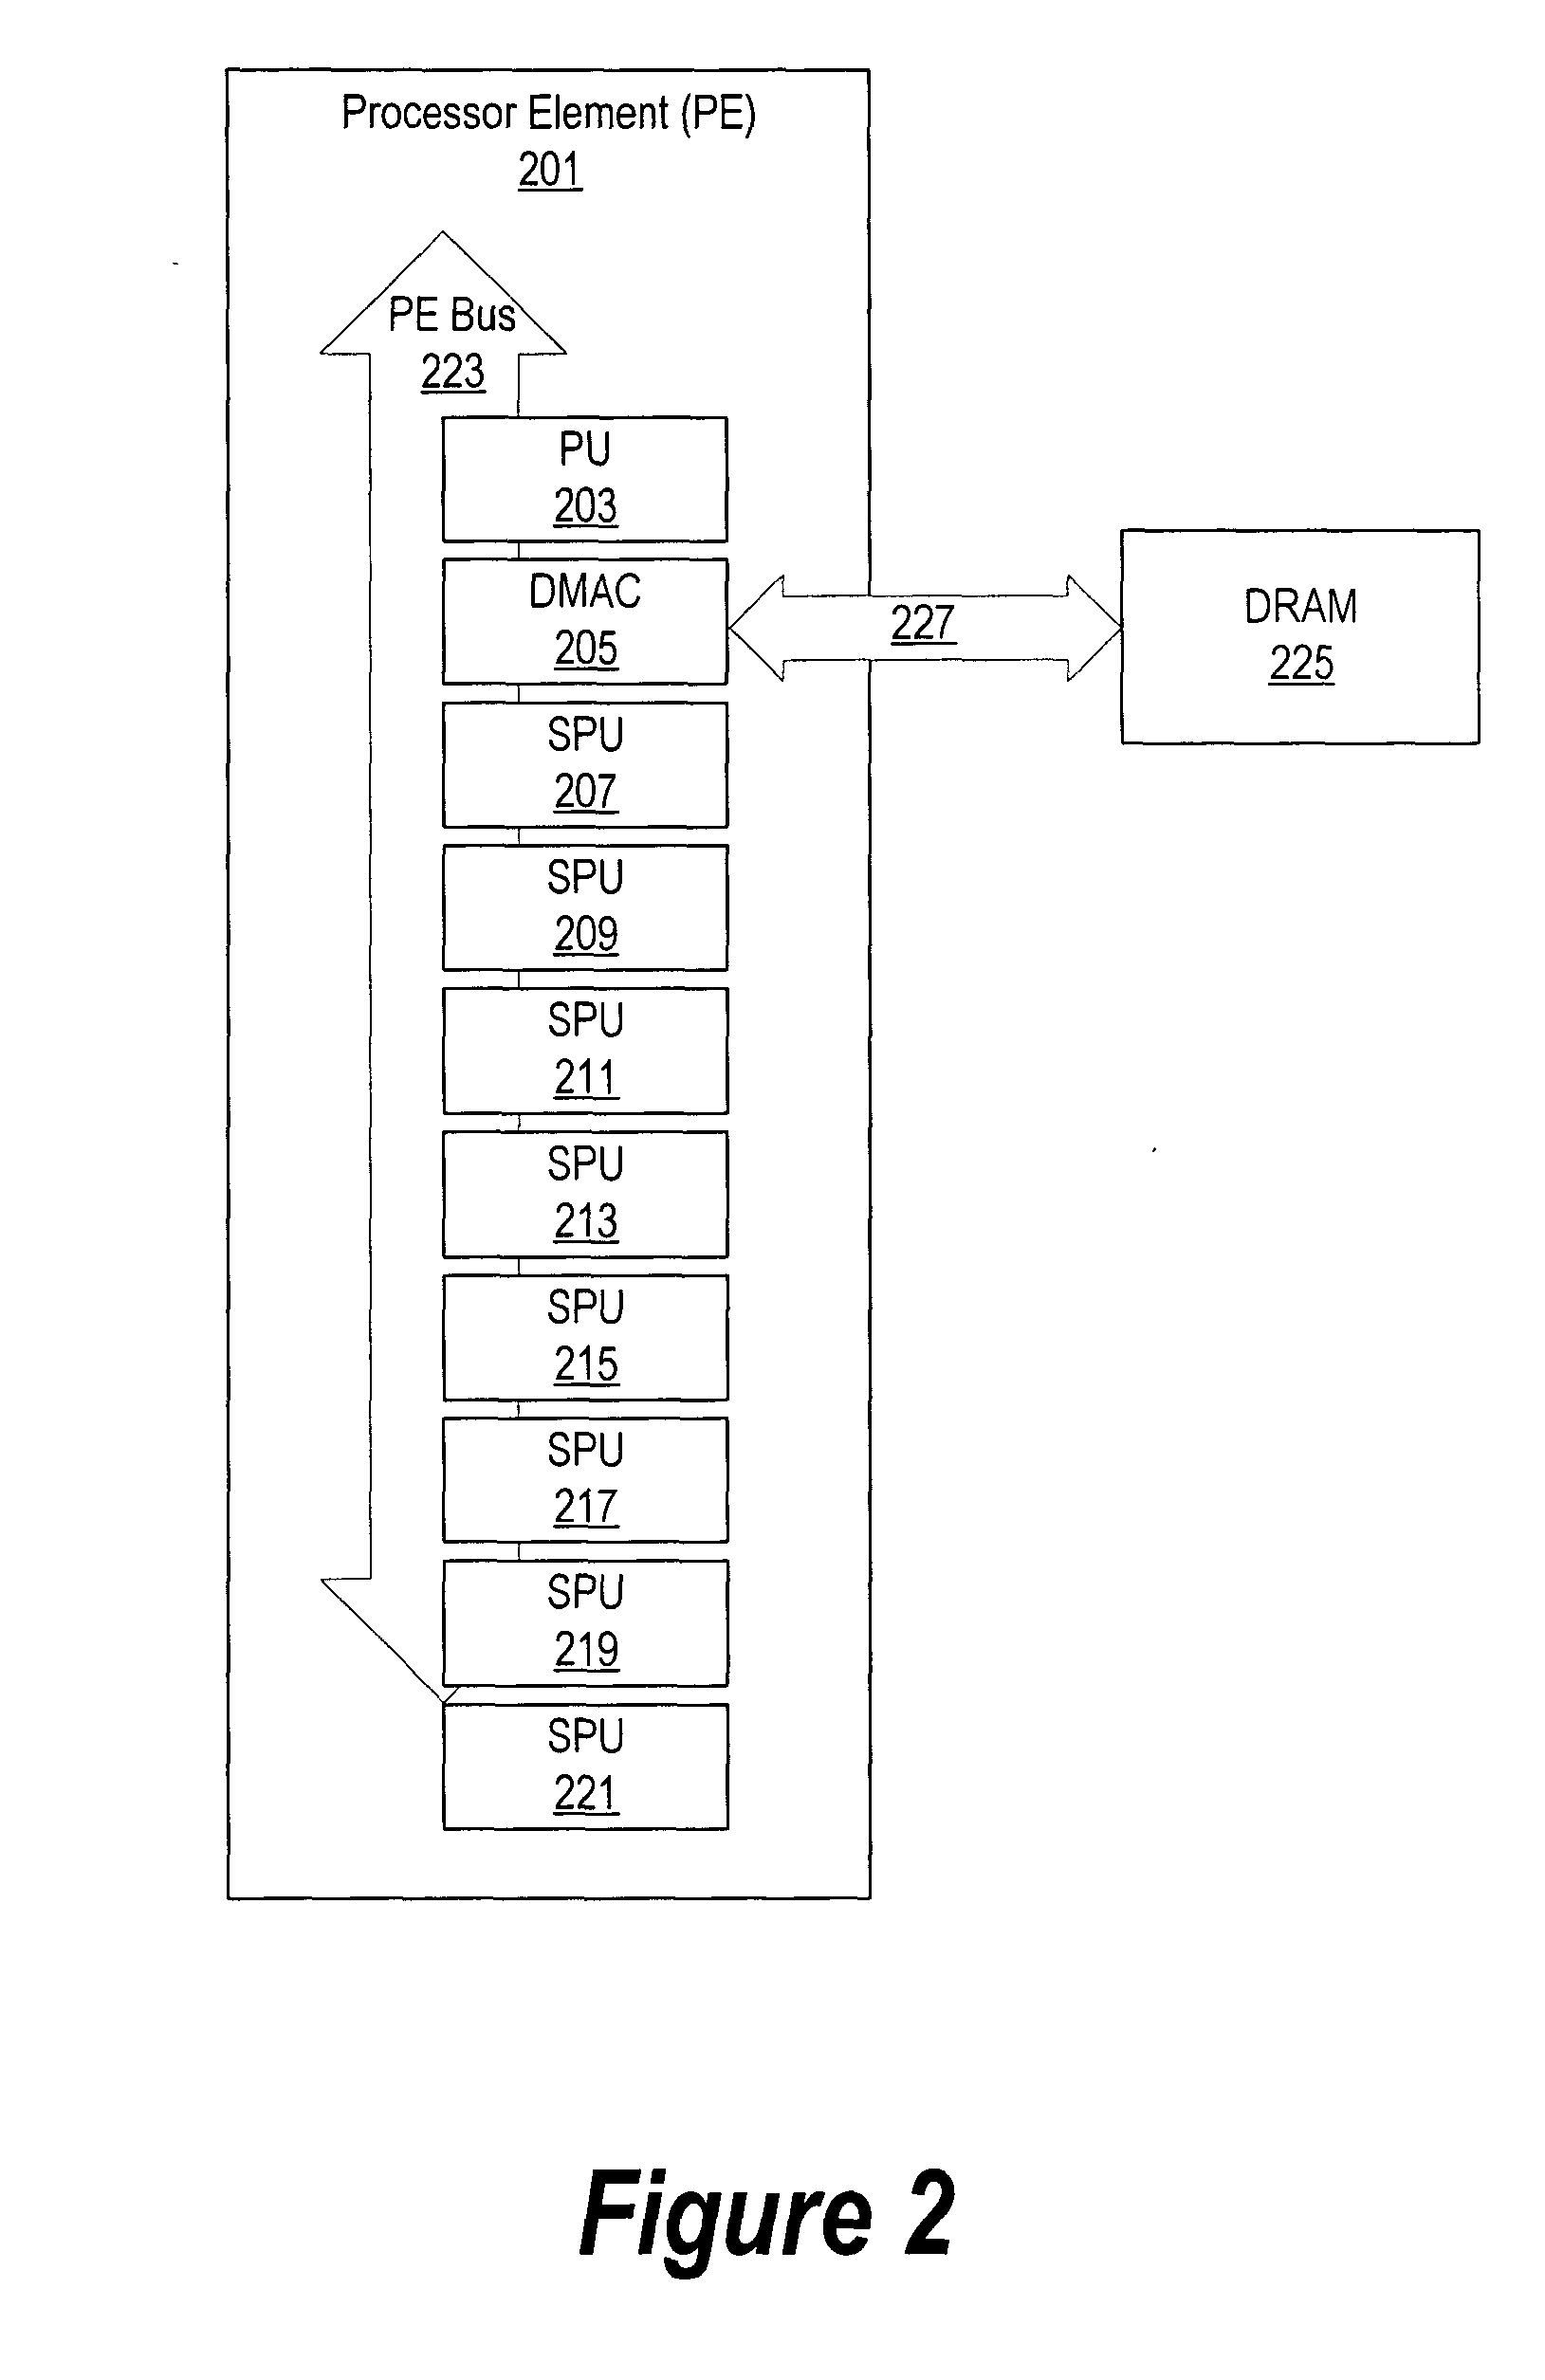 System and method for compiling source code for multi-processor environments